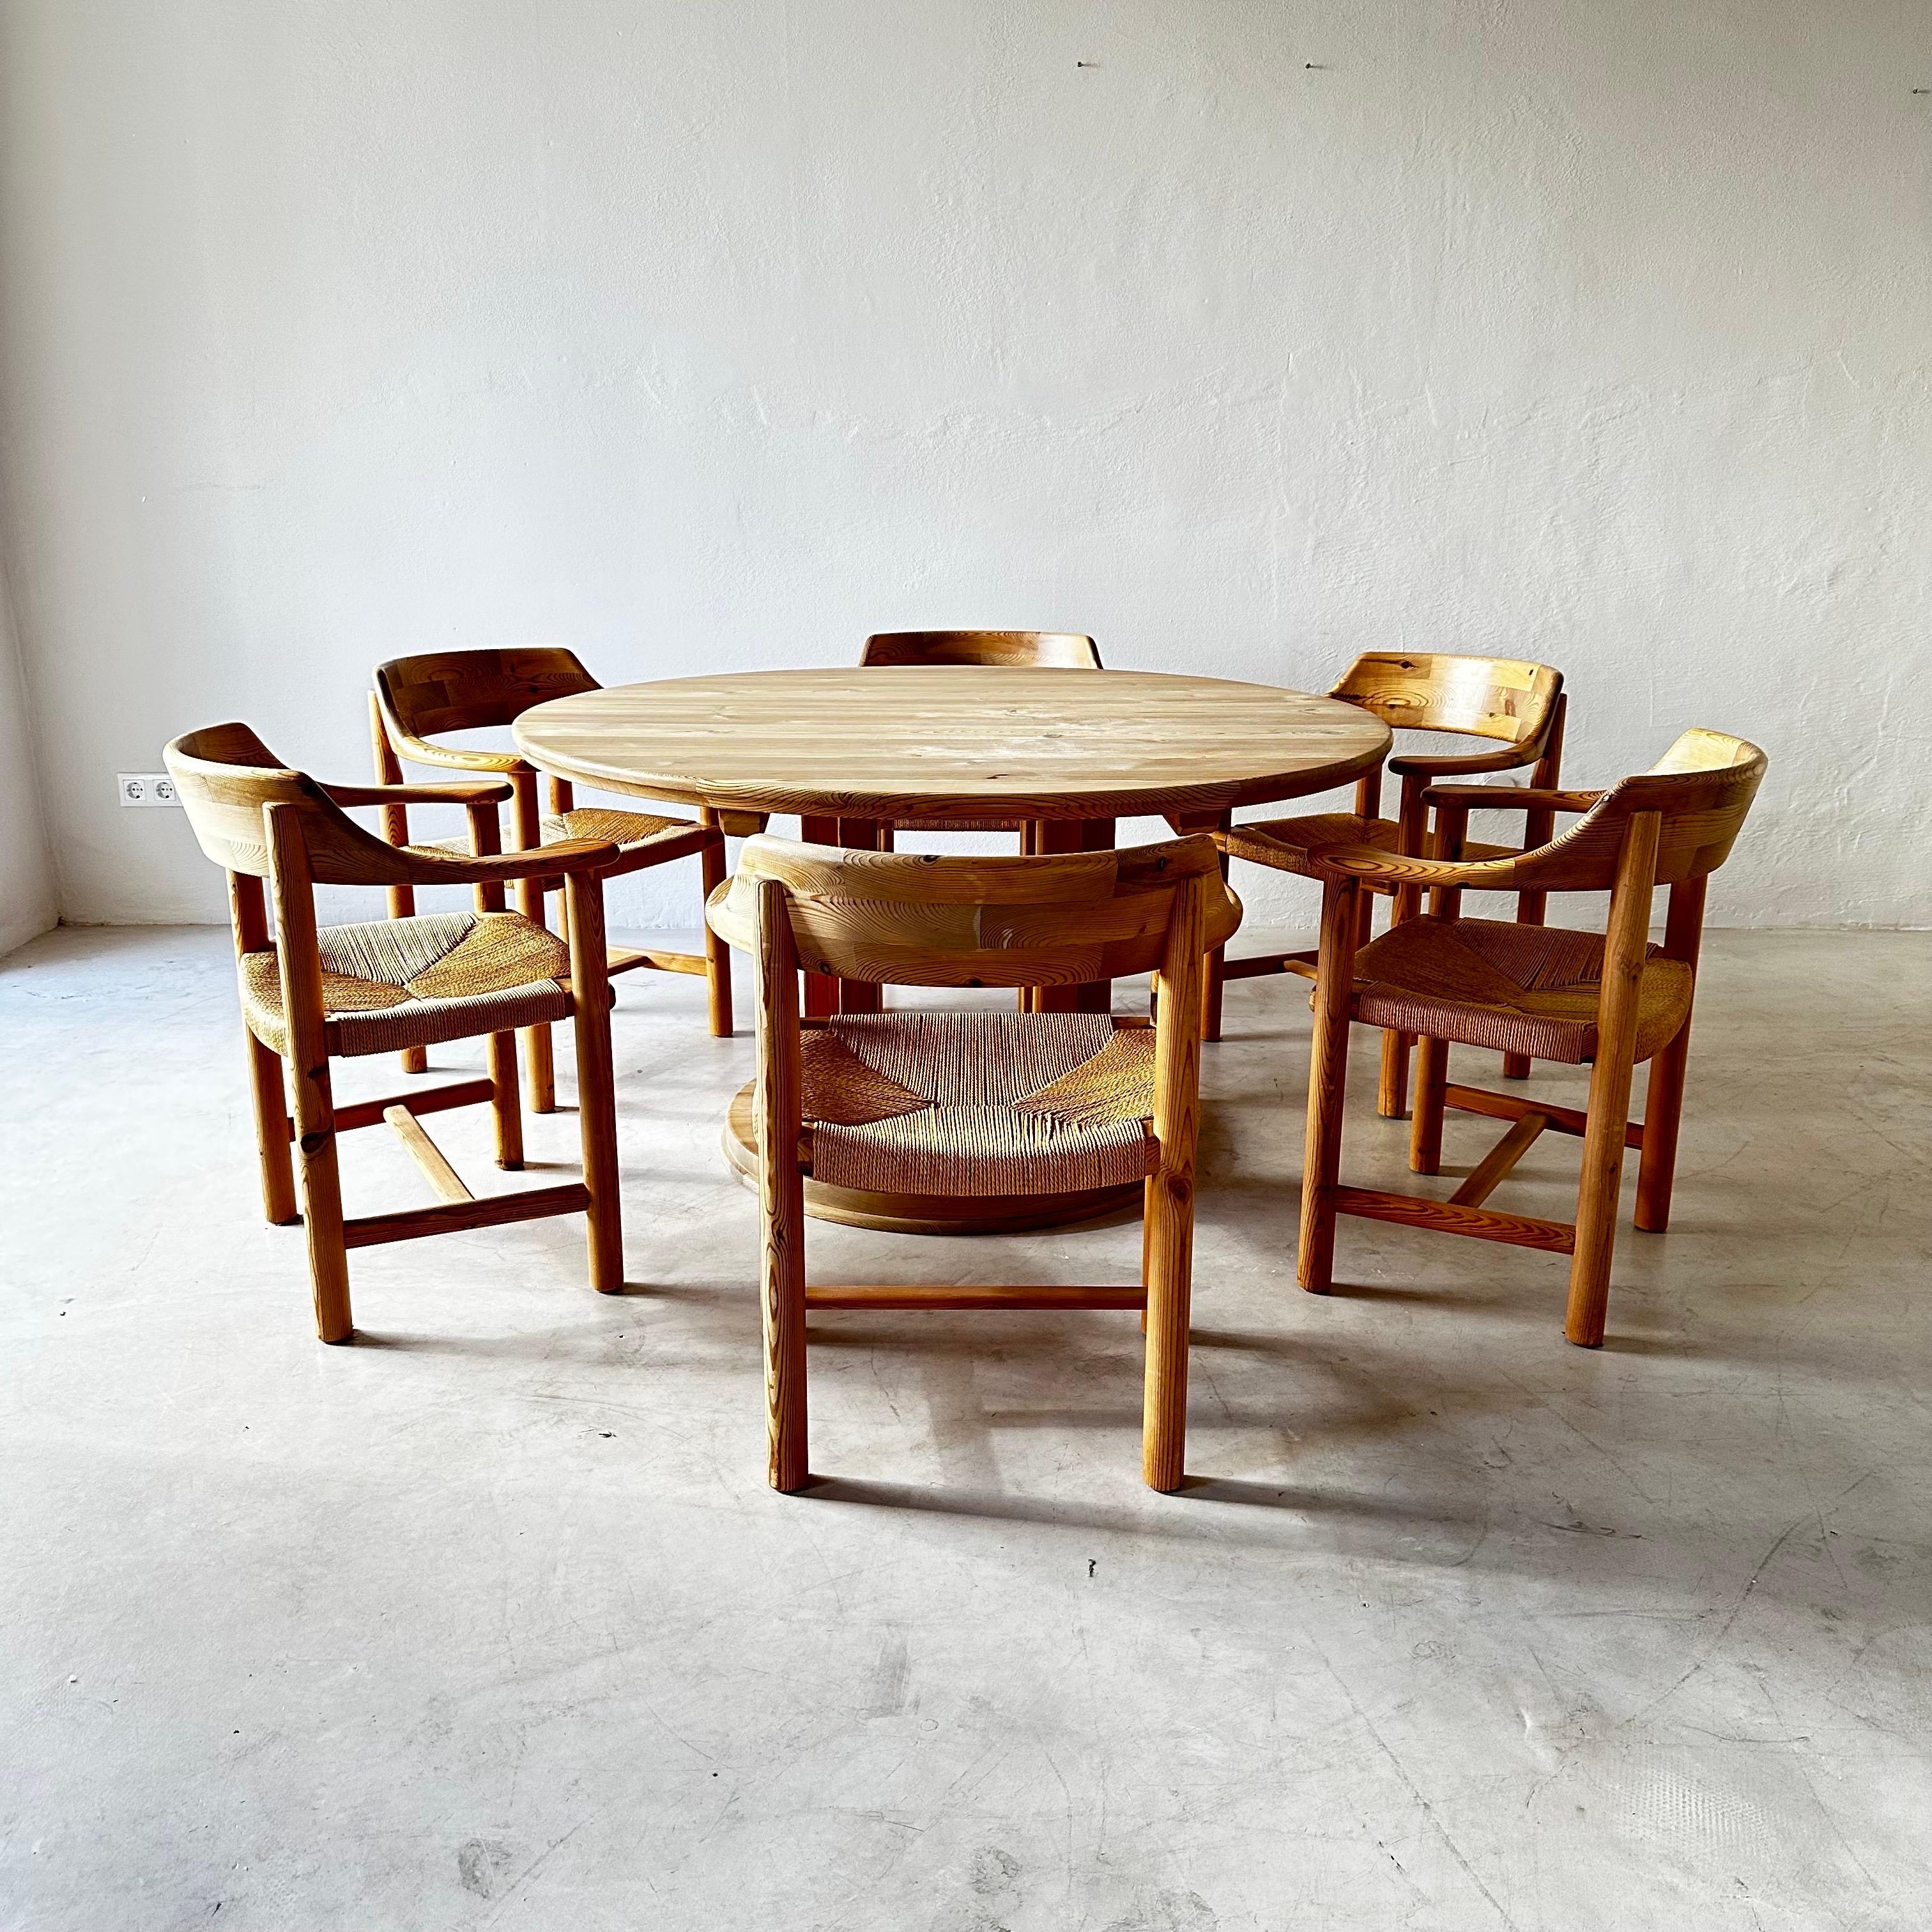 Rare Scandinavian-Modern rainer daumiller solid pine dining room set, Sweden 1970s.

This fantastic and very rare dining room set contains an oversized dining table and six dining chairs, designed by Rainer Daumiller. The tabletop rests on thick